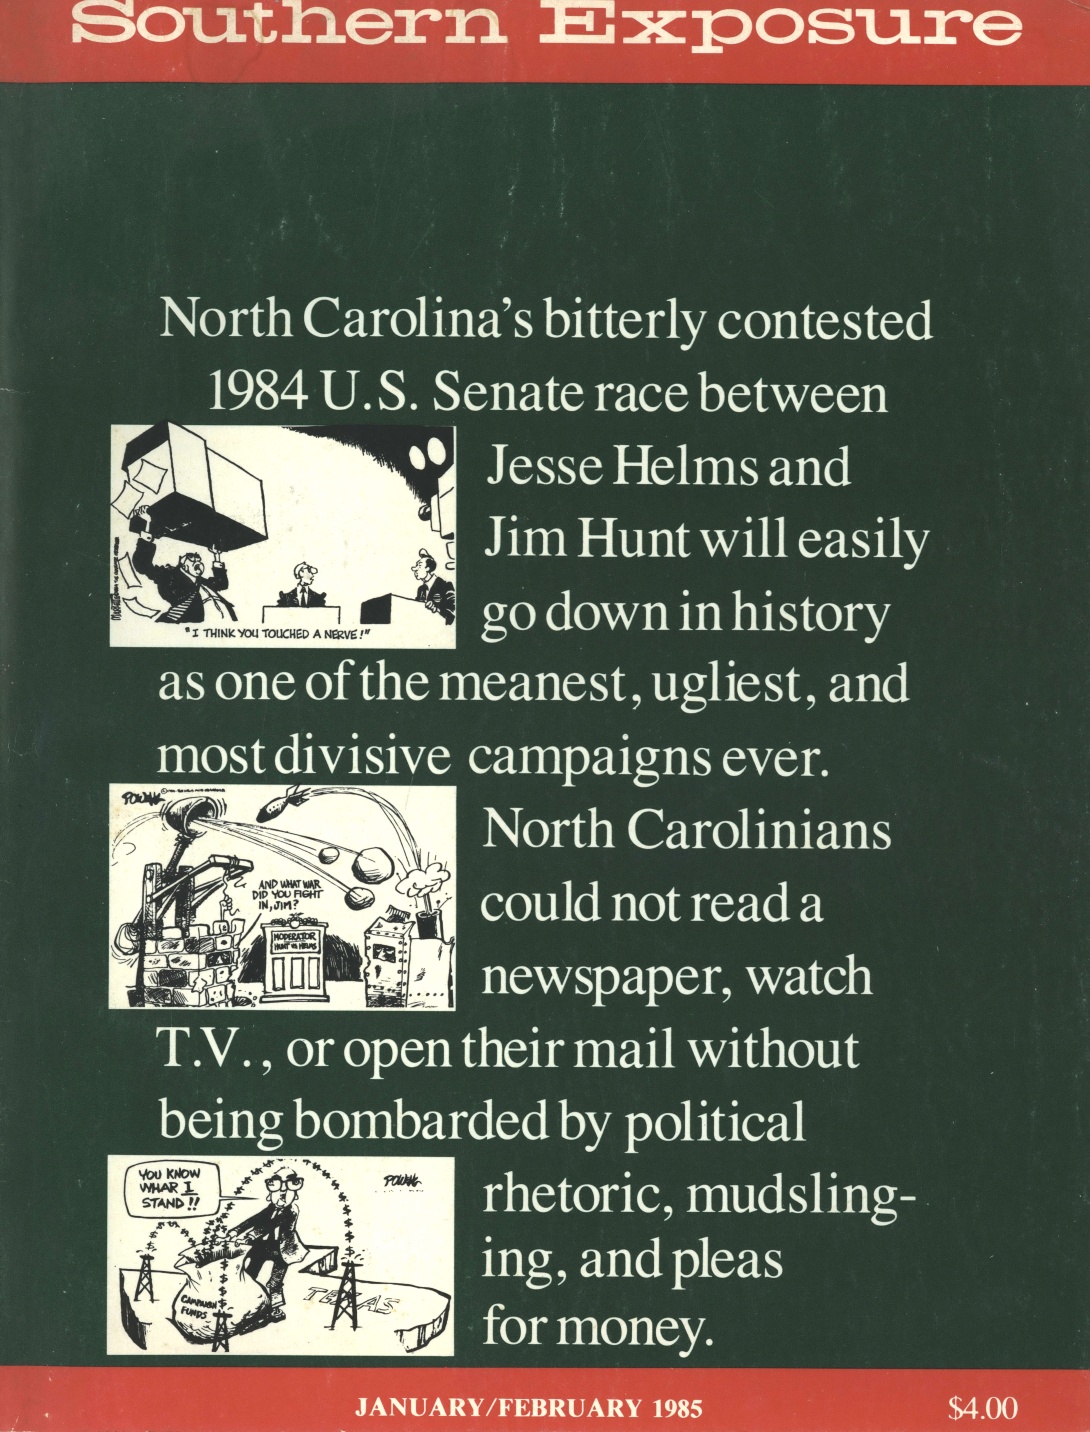 Magazine cover with white text reading "North Carolina's bitterly contested 1984 US Senate race between Jesse Helms and Jim Hunt will easily go down in history as one of the meanest, ugliest, and most divisive campaigns ever. North Carolinians could not read a newspaper, watch TV, or open their mail without being bombarded by political rhetoric, mudslinging, and pleas for money."